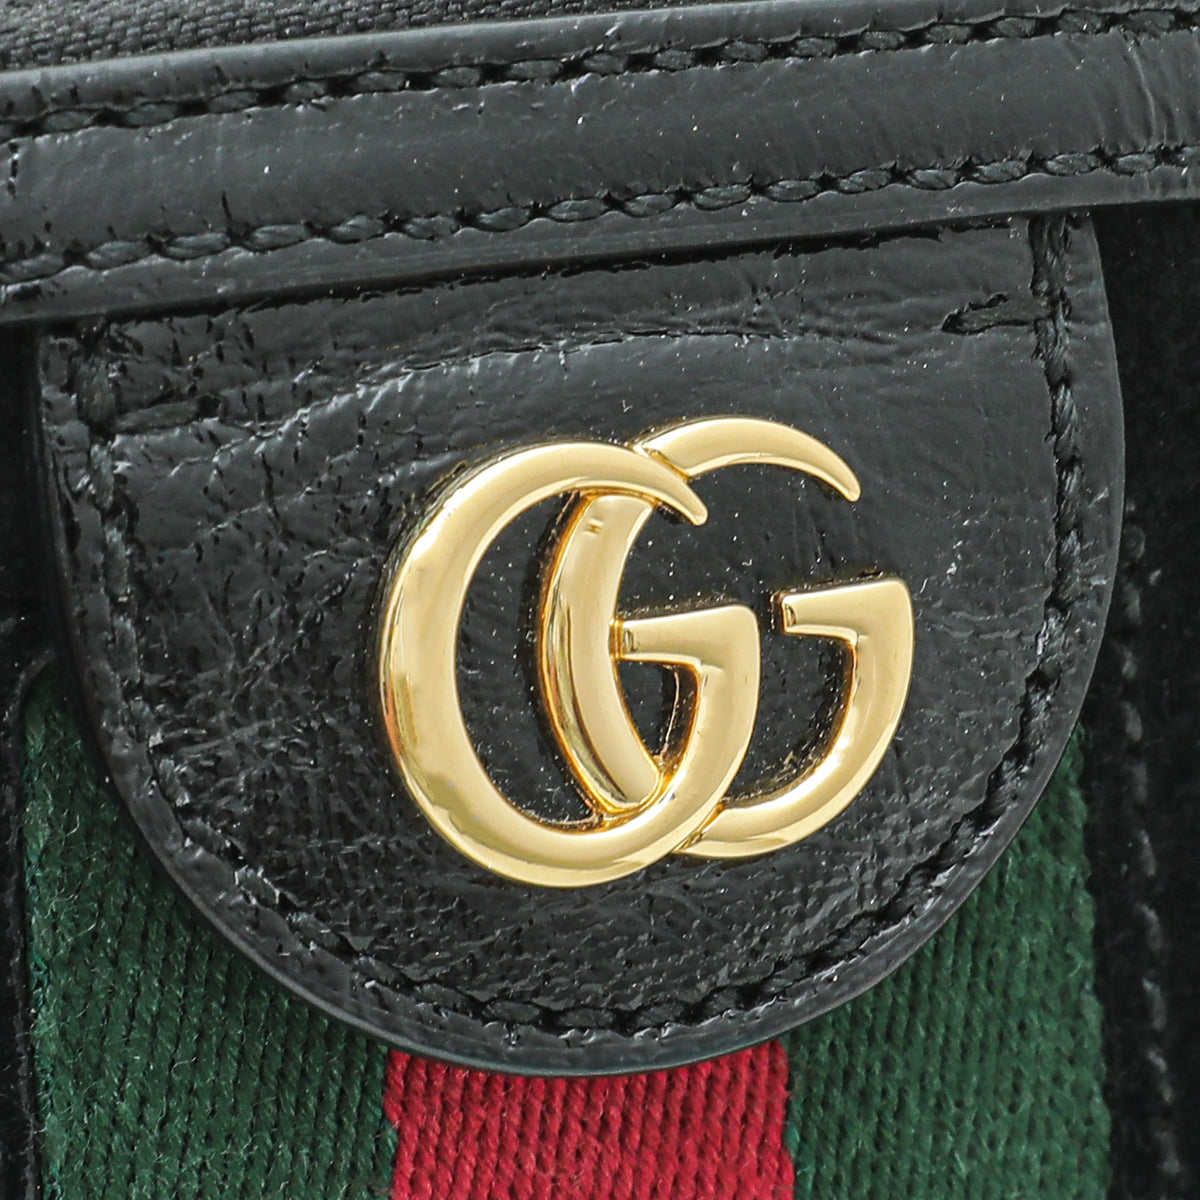 Gucci Black GG Ophidia Small Bag